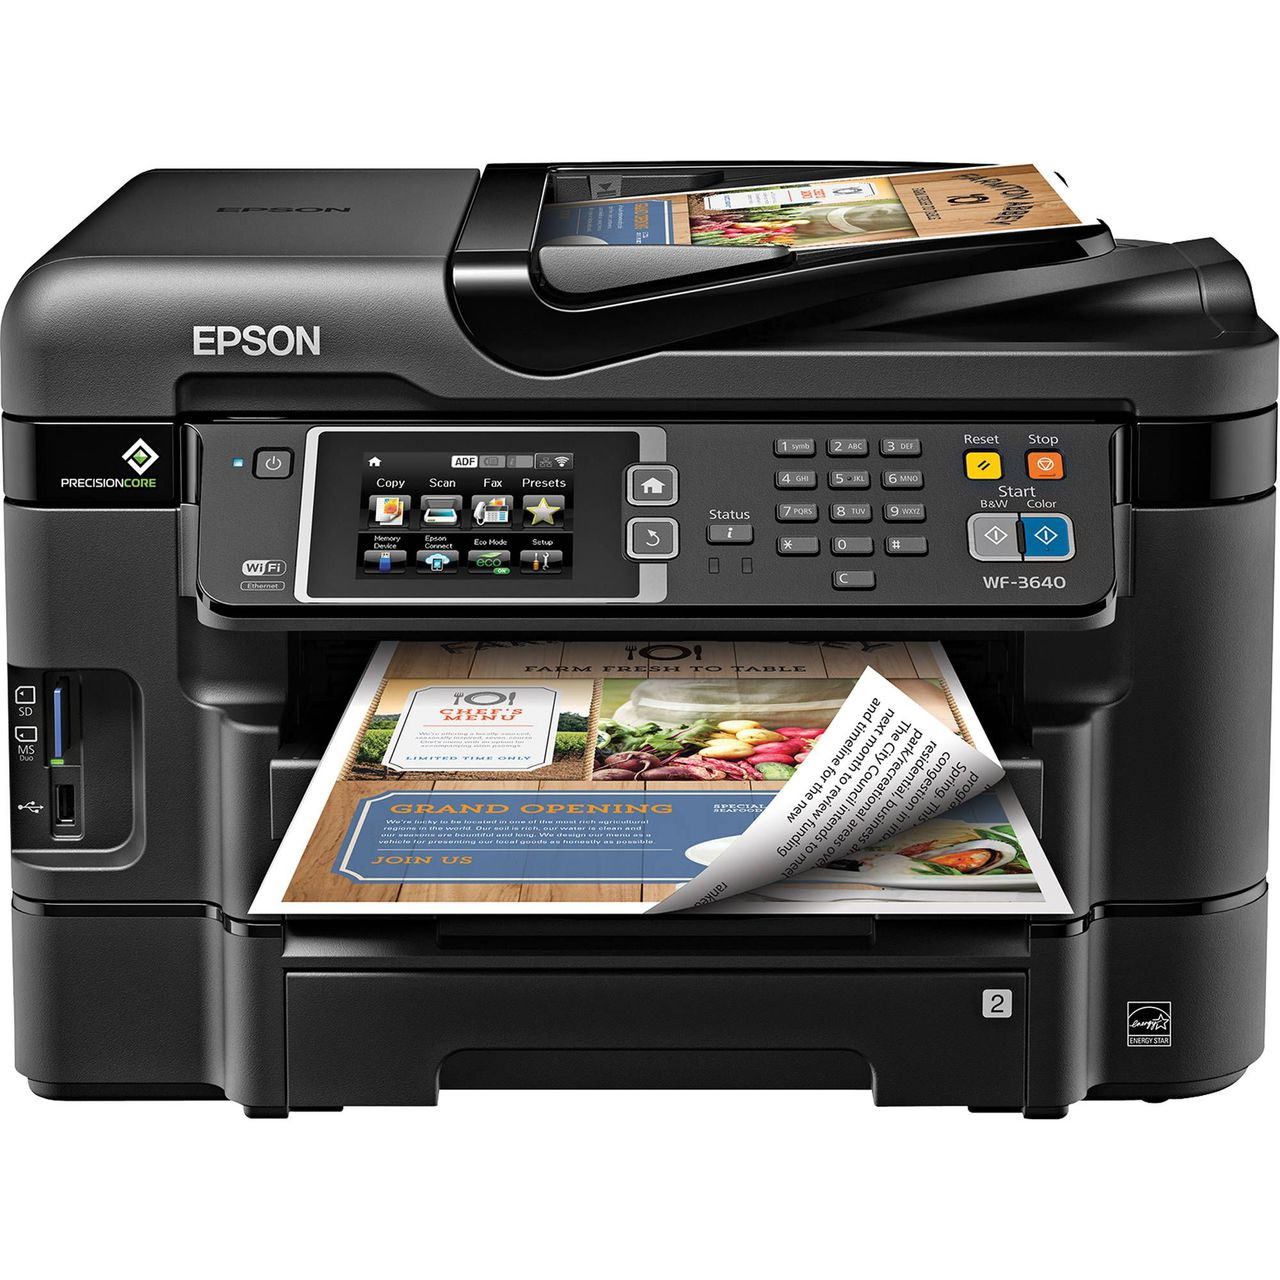 Epson Workforce Wf 2650 All In One Wireless Color Printer With Scanner Copier And Fax 9130